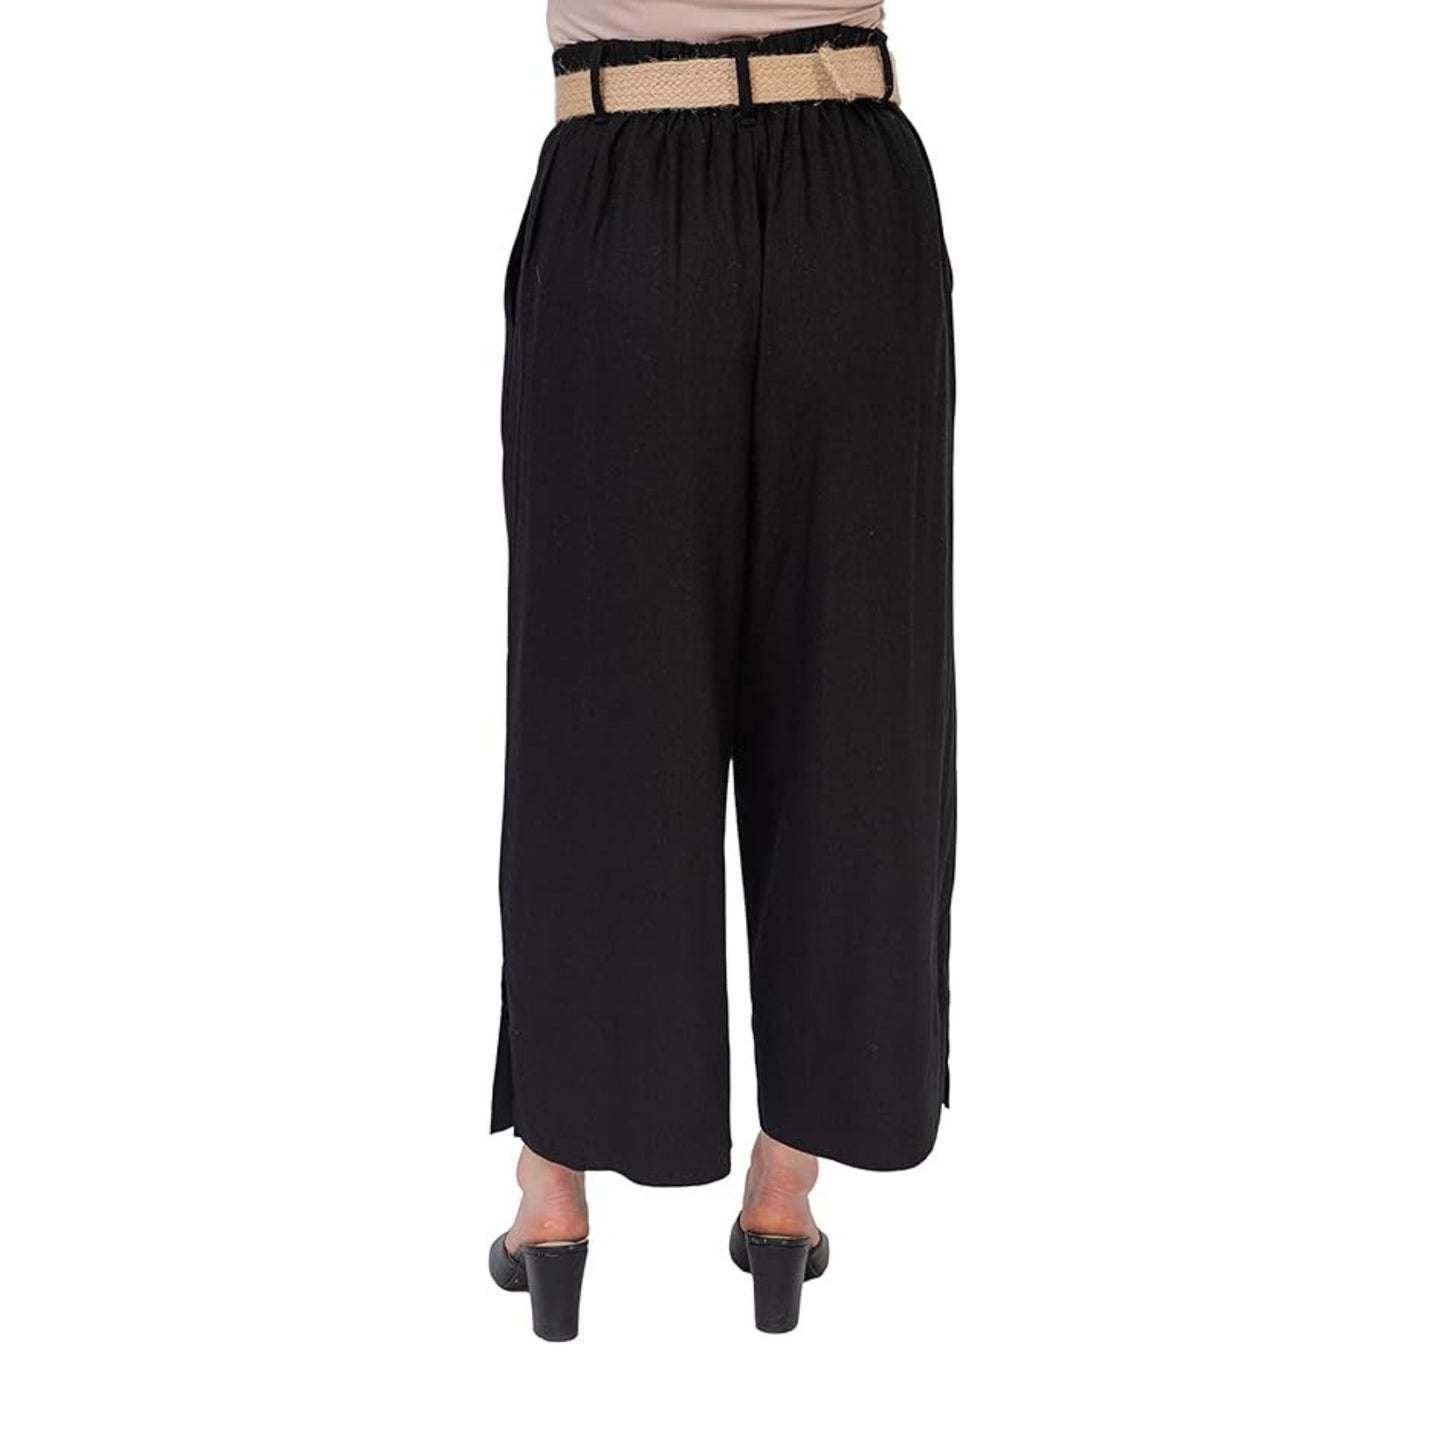 Women's High Waist Belted Wide Leg Pants with Pocket Casual Business Work  Office Palazzo Pants